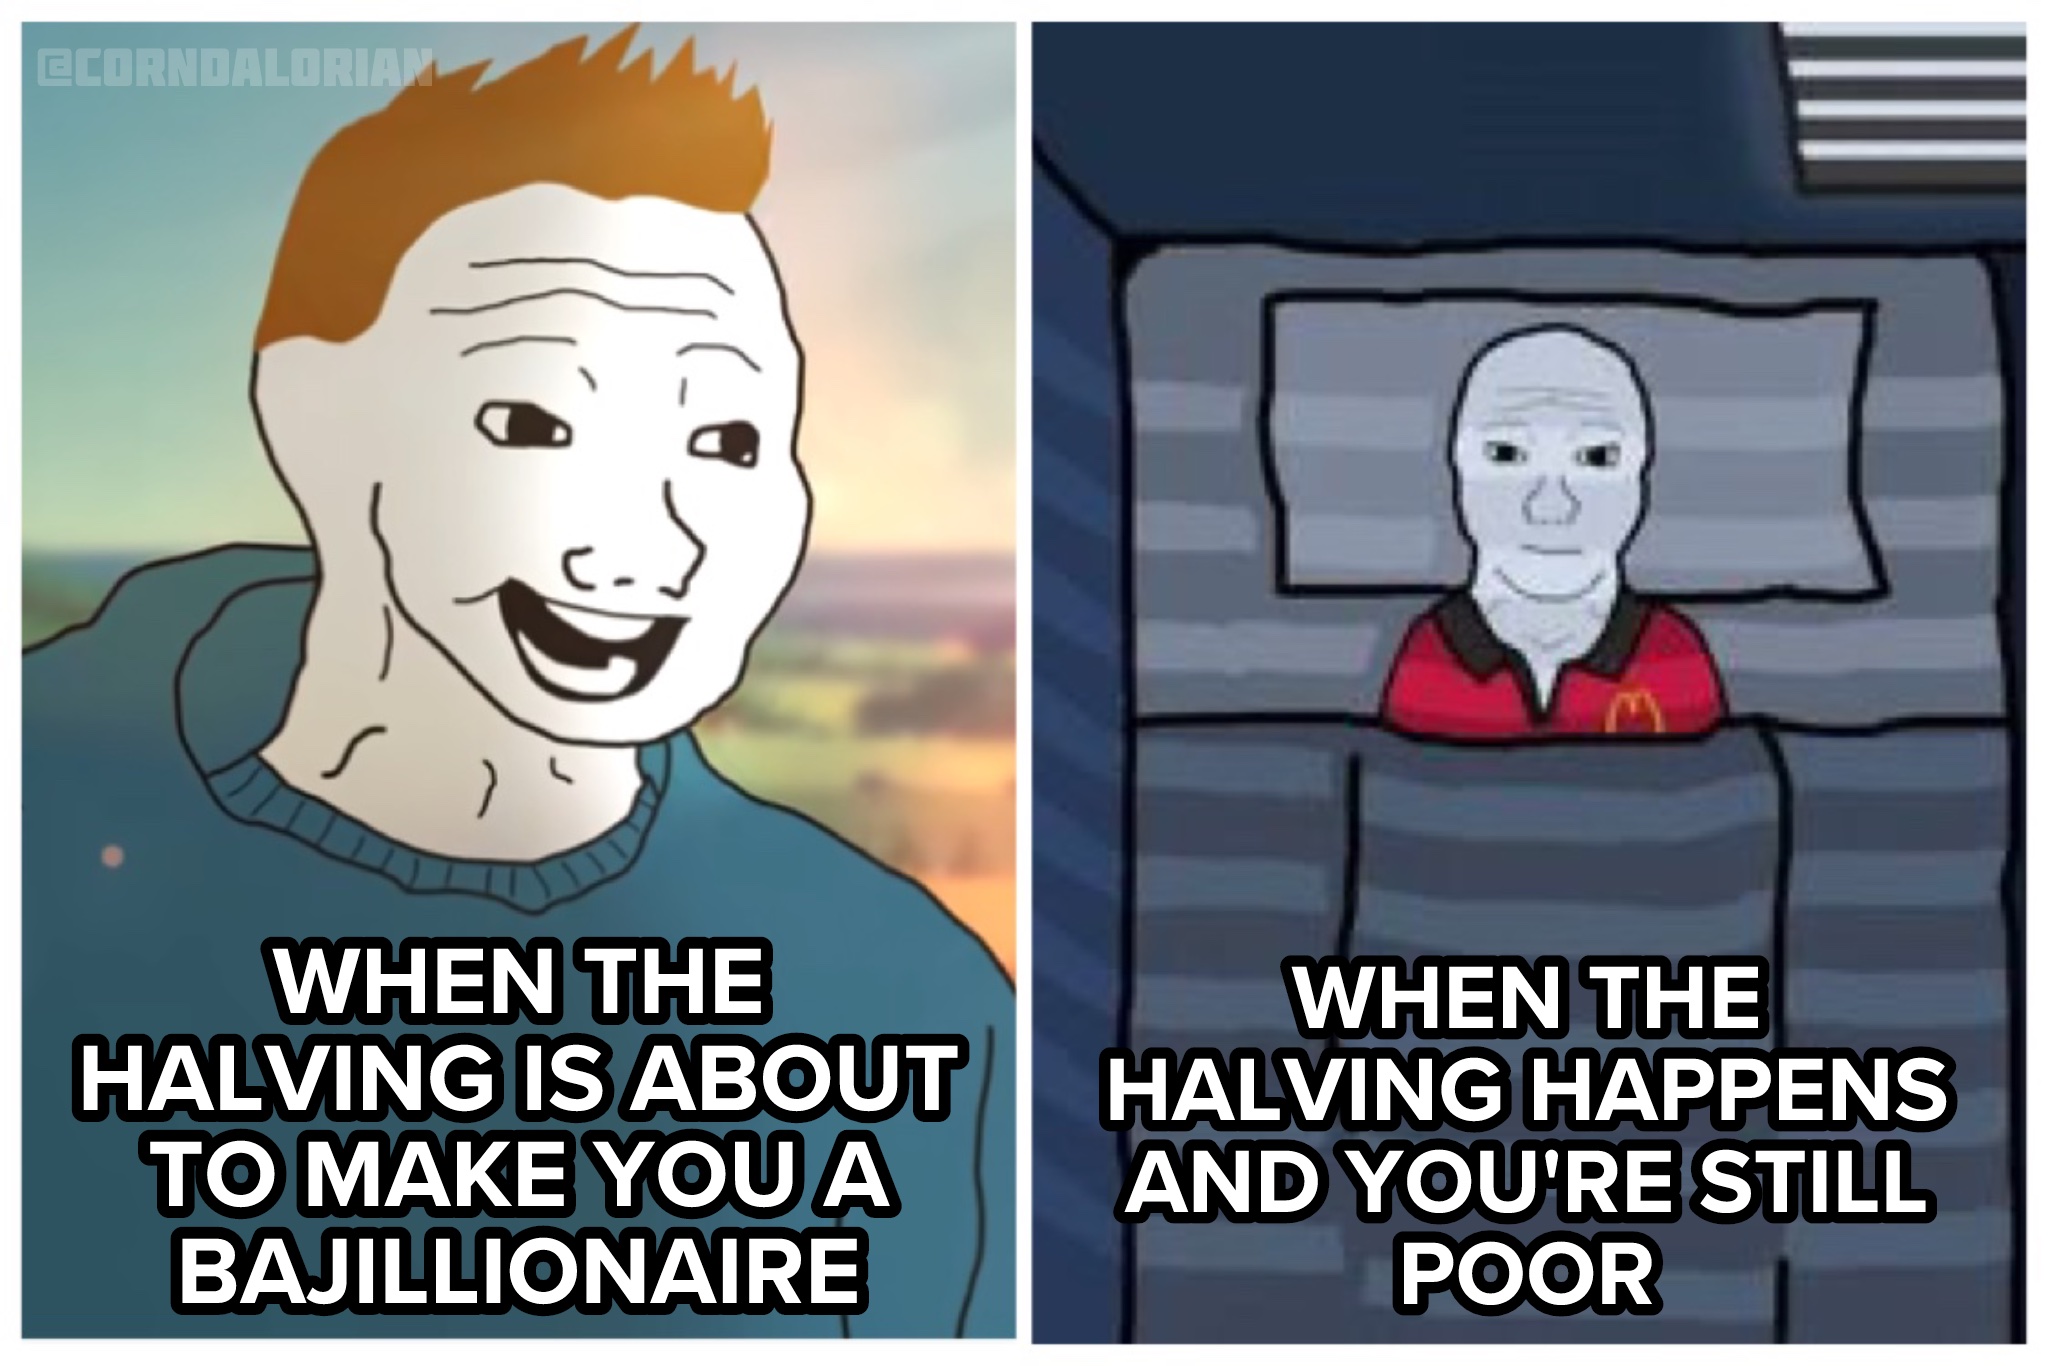 WHEN THE WHEN THE
HALVING IS ABOUT | HALVING HAPPENS
TO MAKE YOU A AND YOU'RE STILL
BAJILLIONAIRE POO